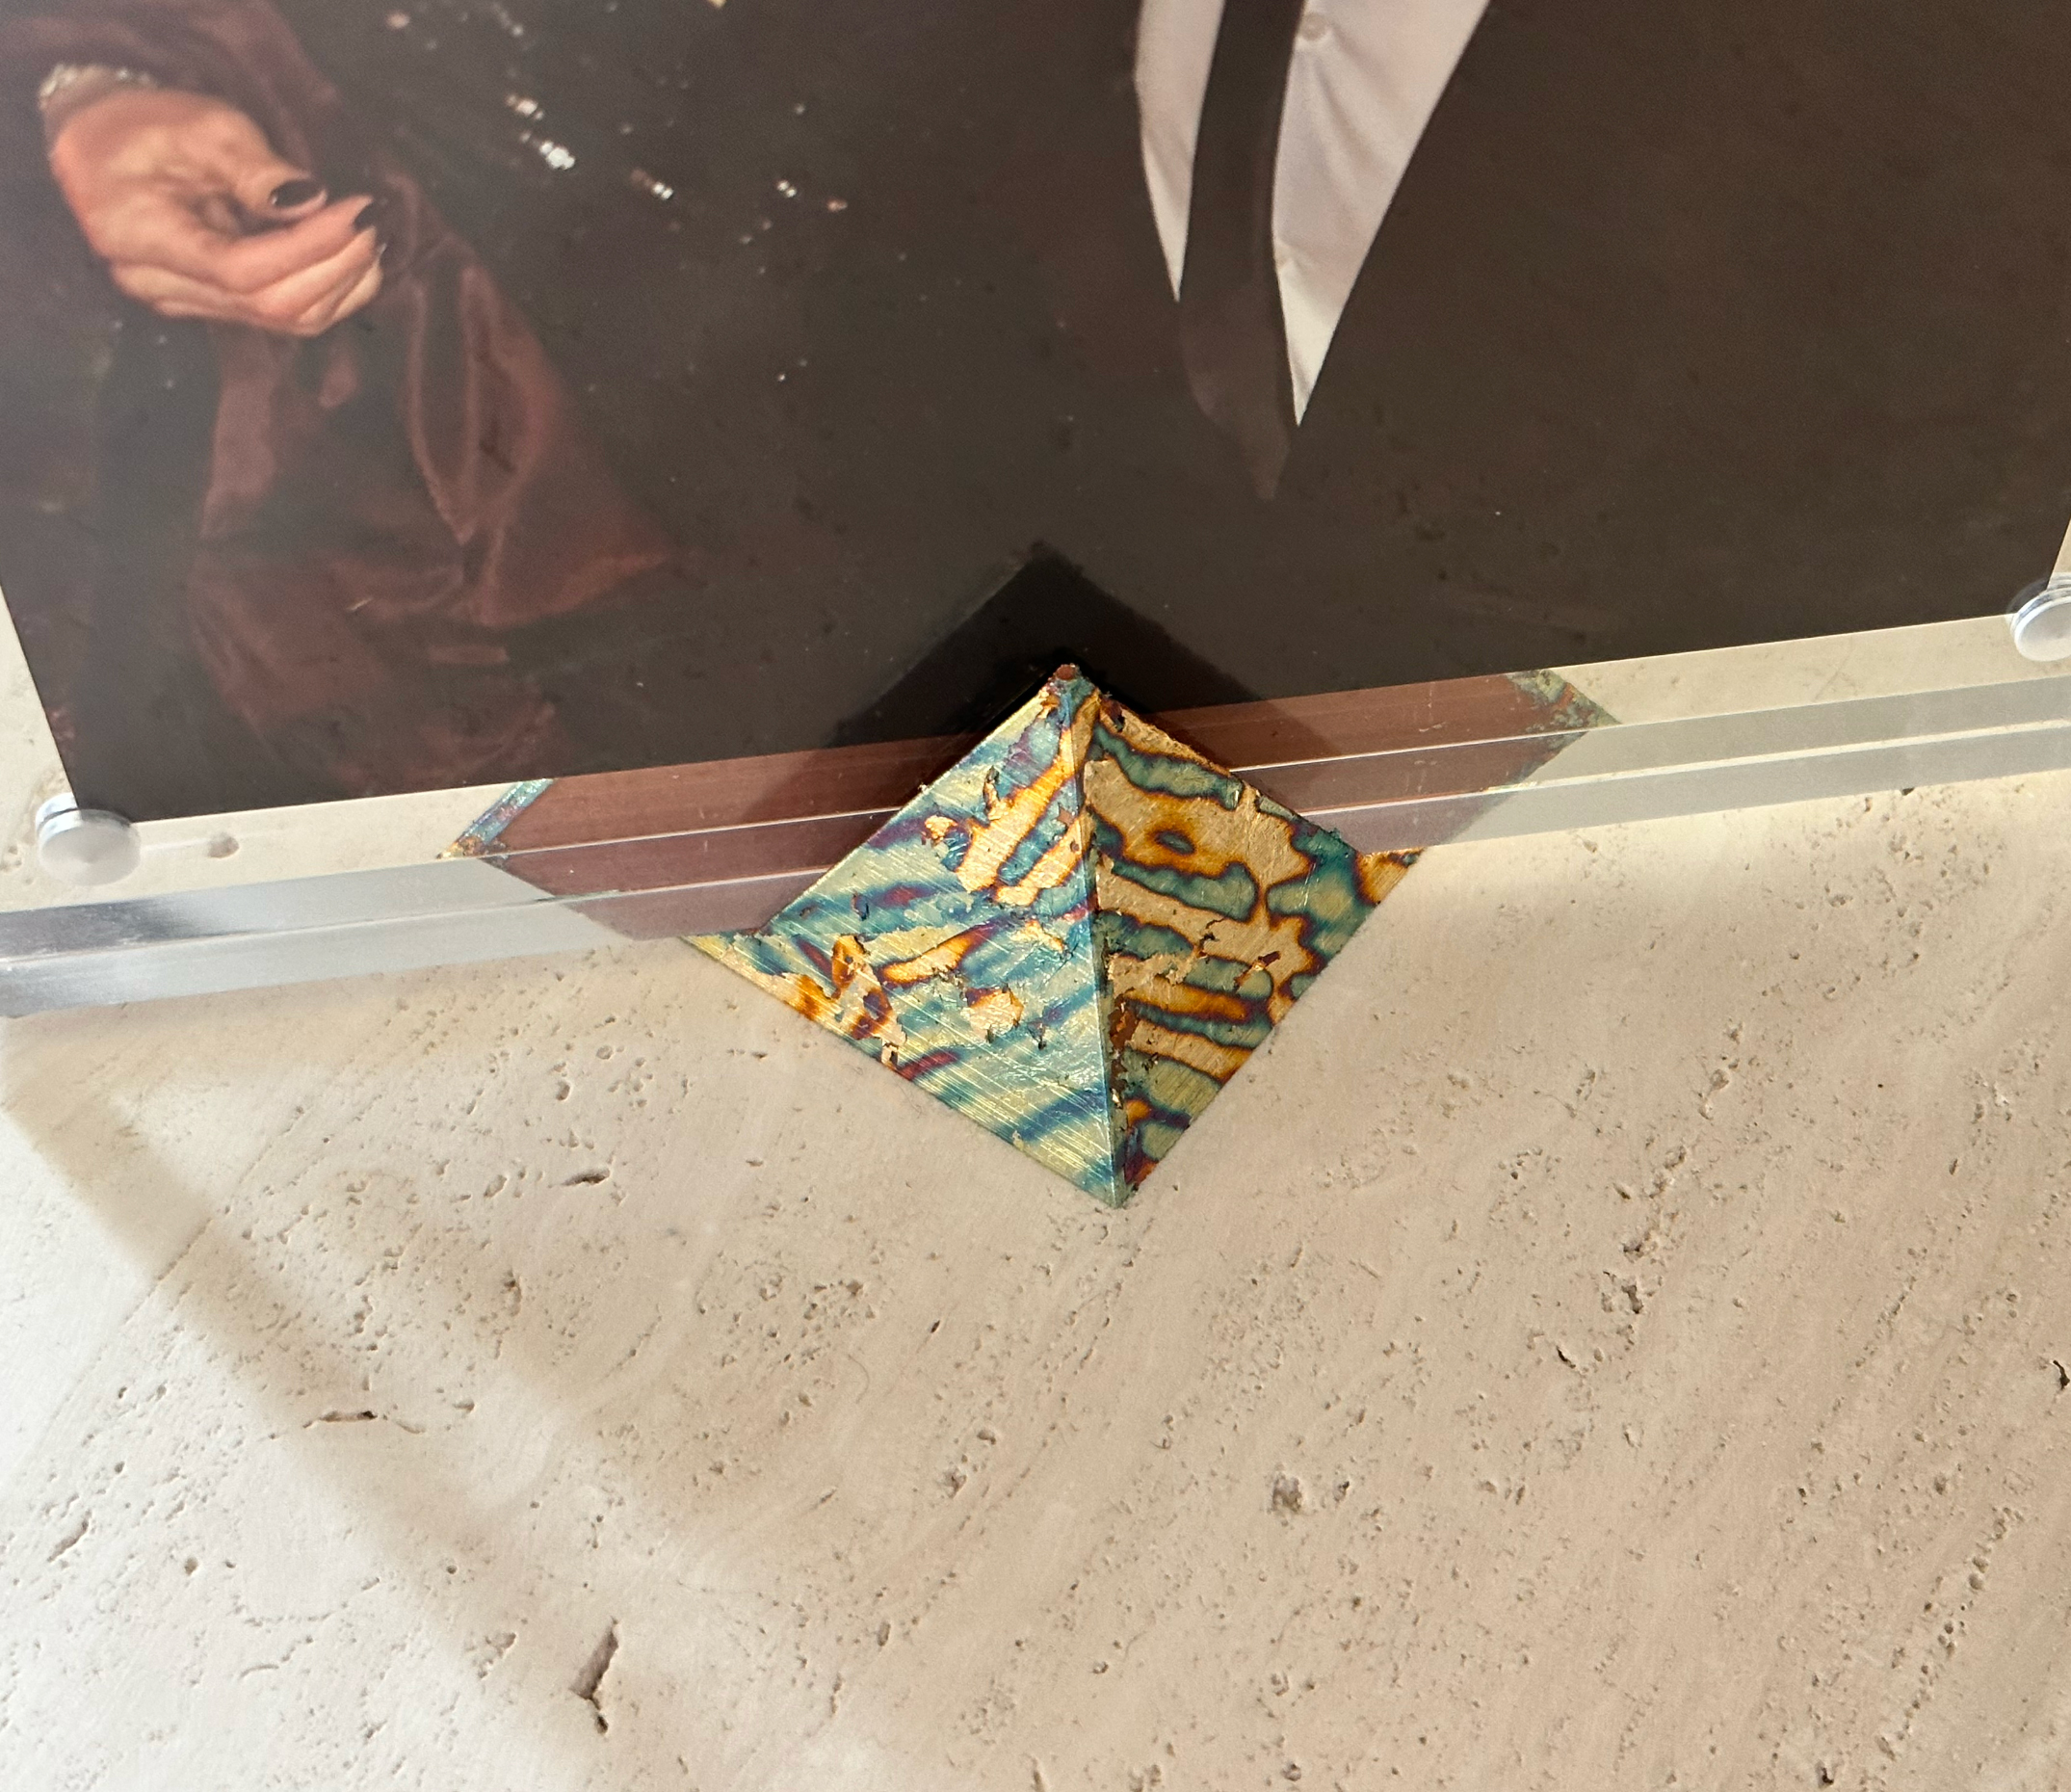 Pyramid Picture Frame Holder / Stand by labemolon